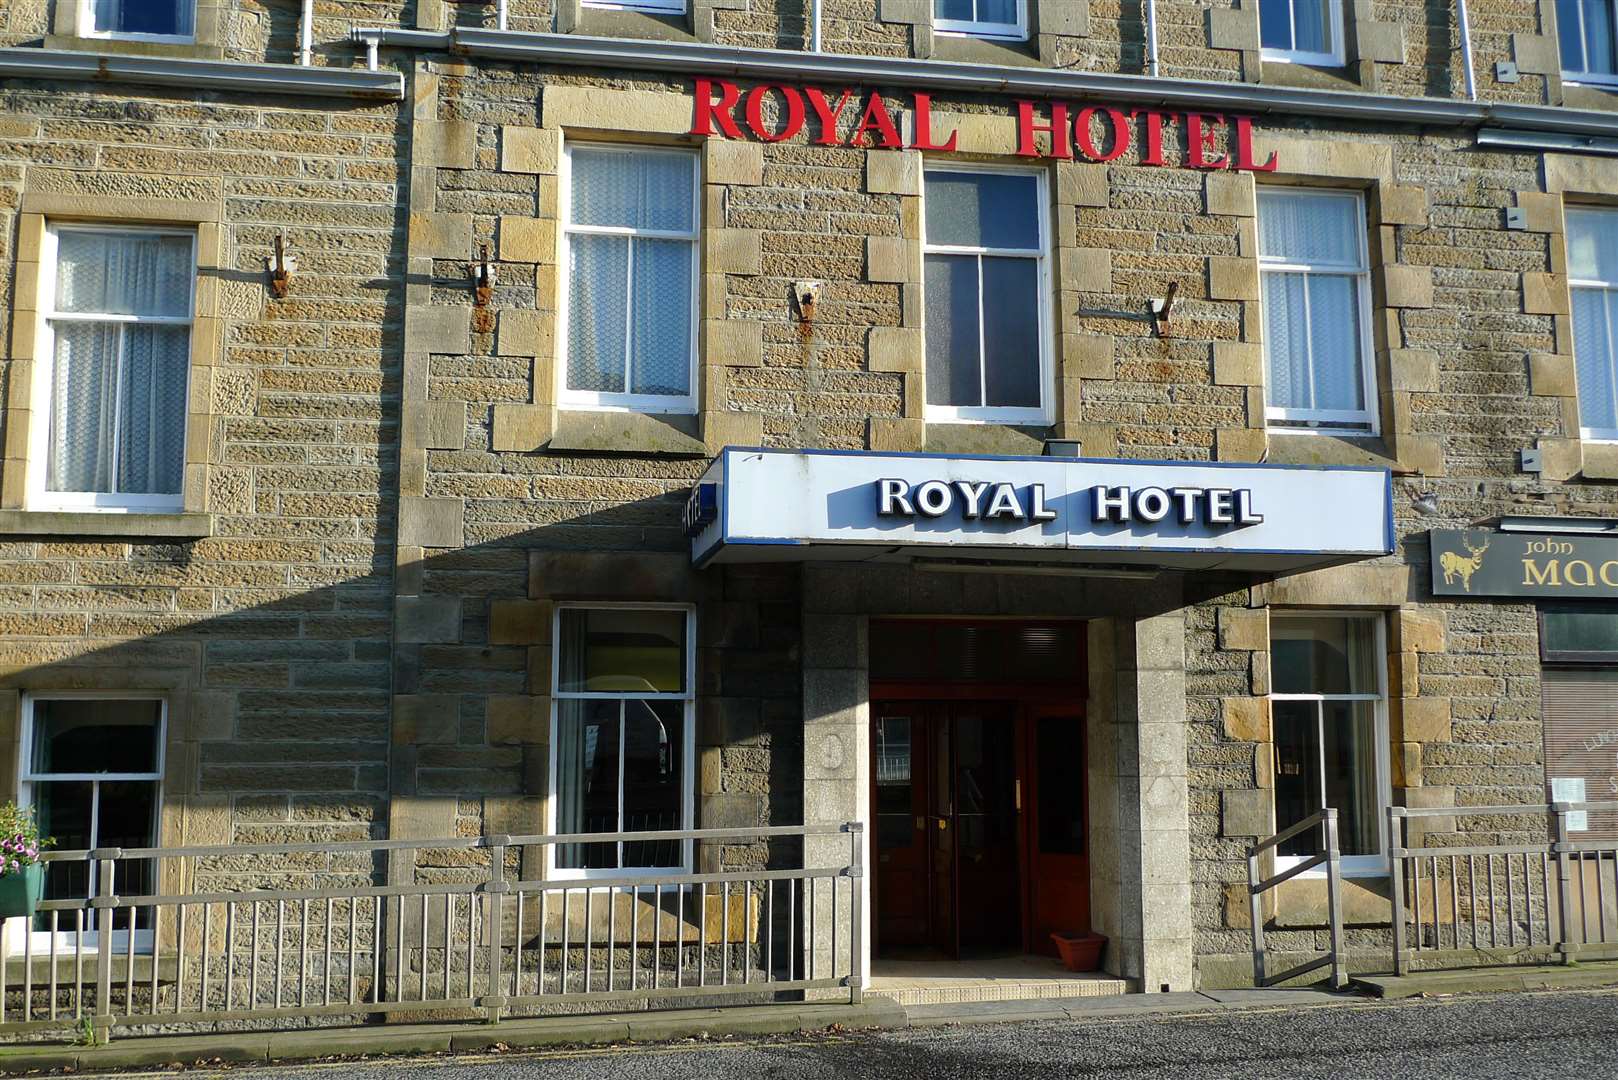 The Royal Hotel in Thurso has been taken over by Glasgow businessman Thomas Melville